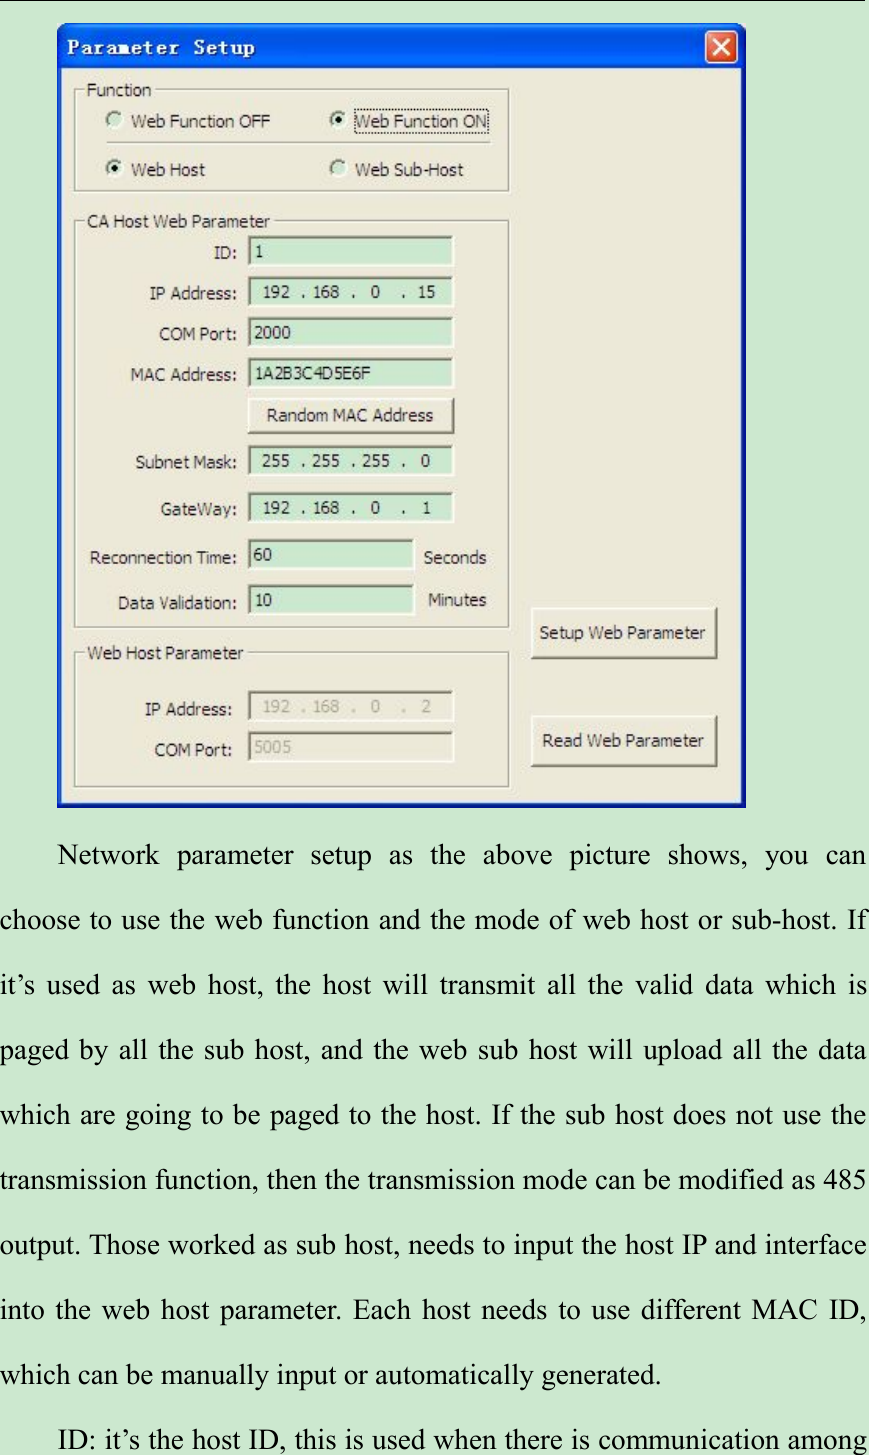 Network parameter setup as the above picture shows, you canchoose to use the web function and the mode of web host or sub-host. Ifit’s used as web host, the host will transmit all the valid data which ispaged by all the sub host, and the web sub host will upload all the datawhich are going to be paged to the host. If the sub host does not use thetransmission function, then the transmission mode can be modified as 485output. Those worked as sub host, needs to input the host IP and interfaceinto the web host parameter. Each host needs to use different MAC ID,which can be manually input or automatically generated.ID: it’s the host ID, this is used when there is communication among